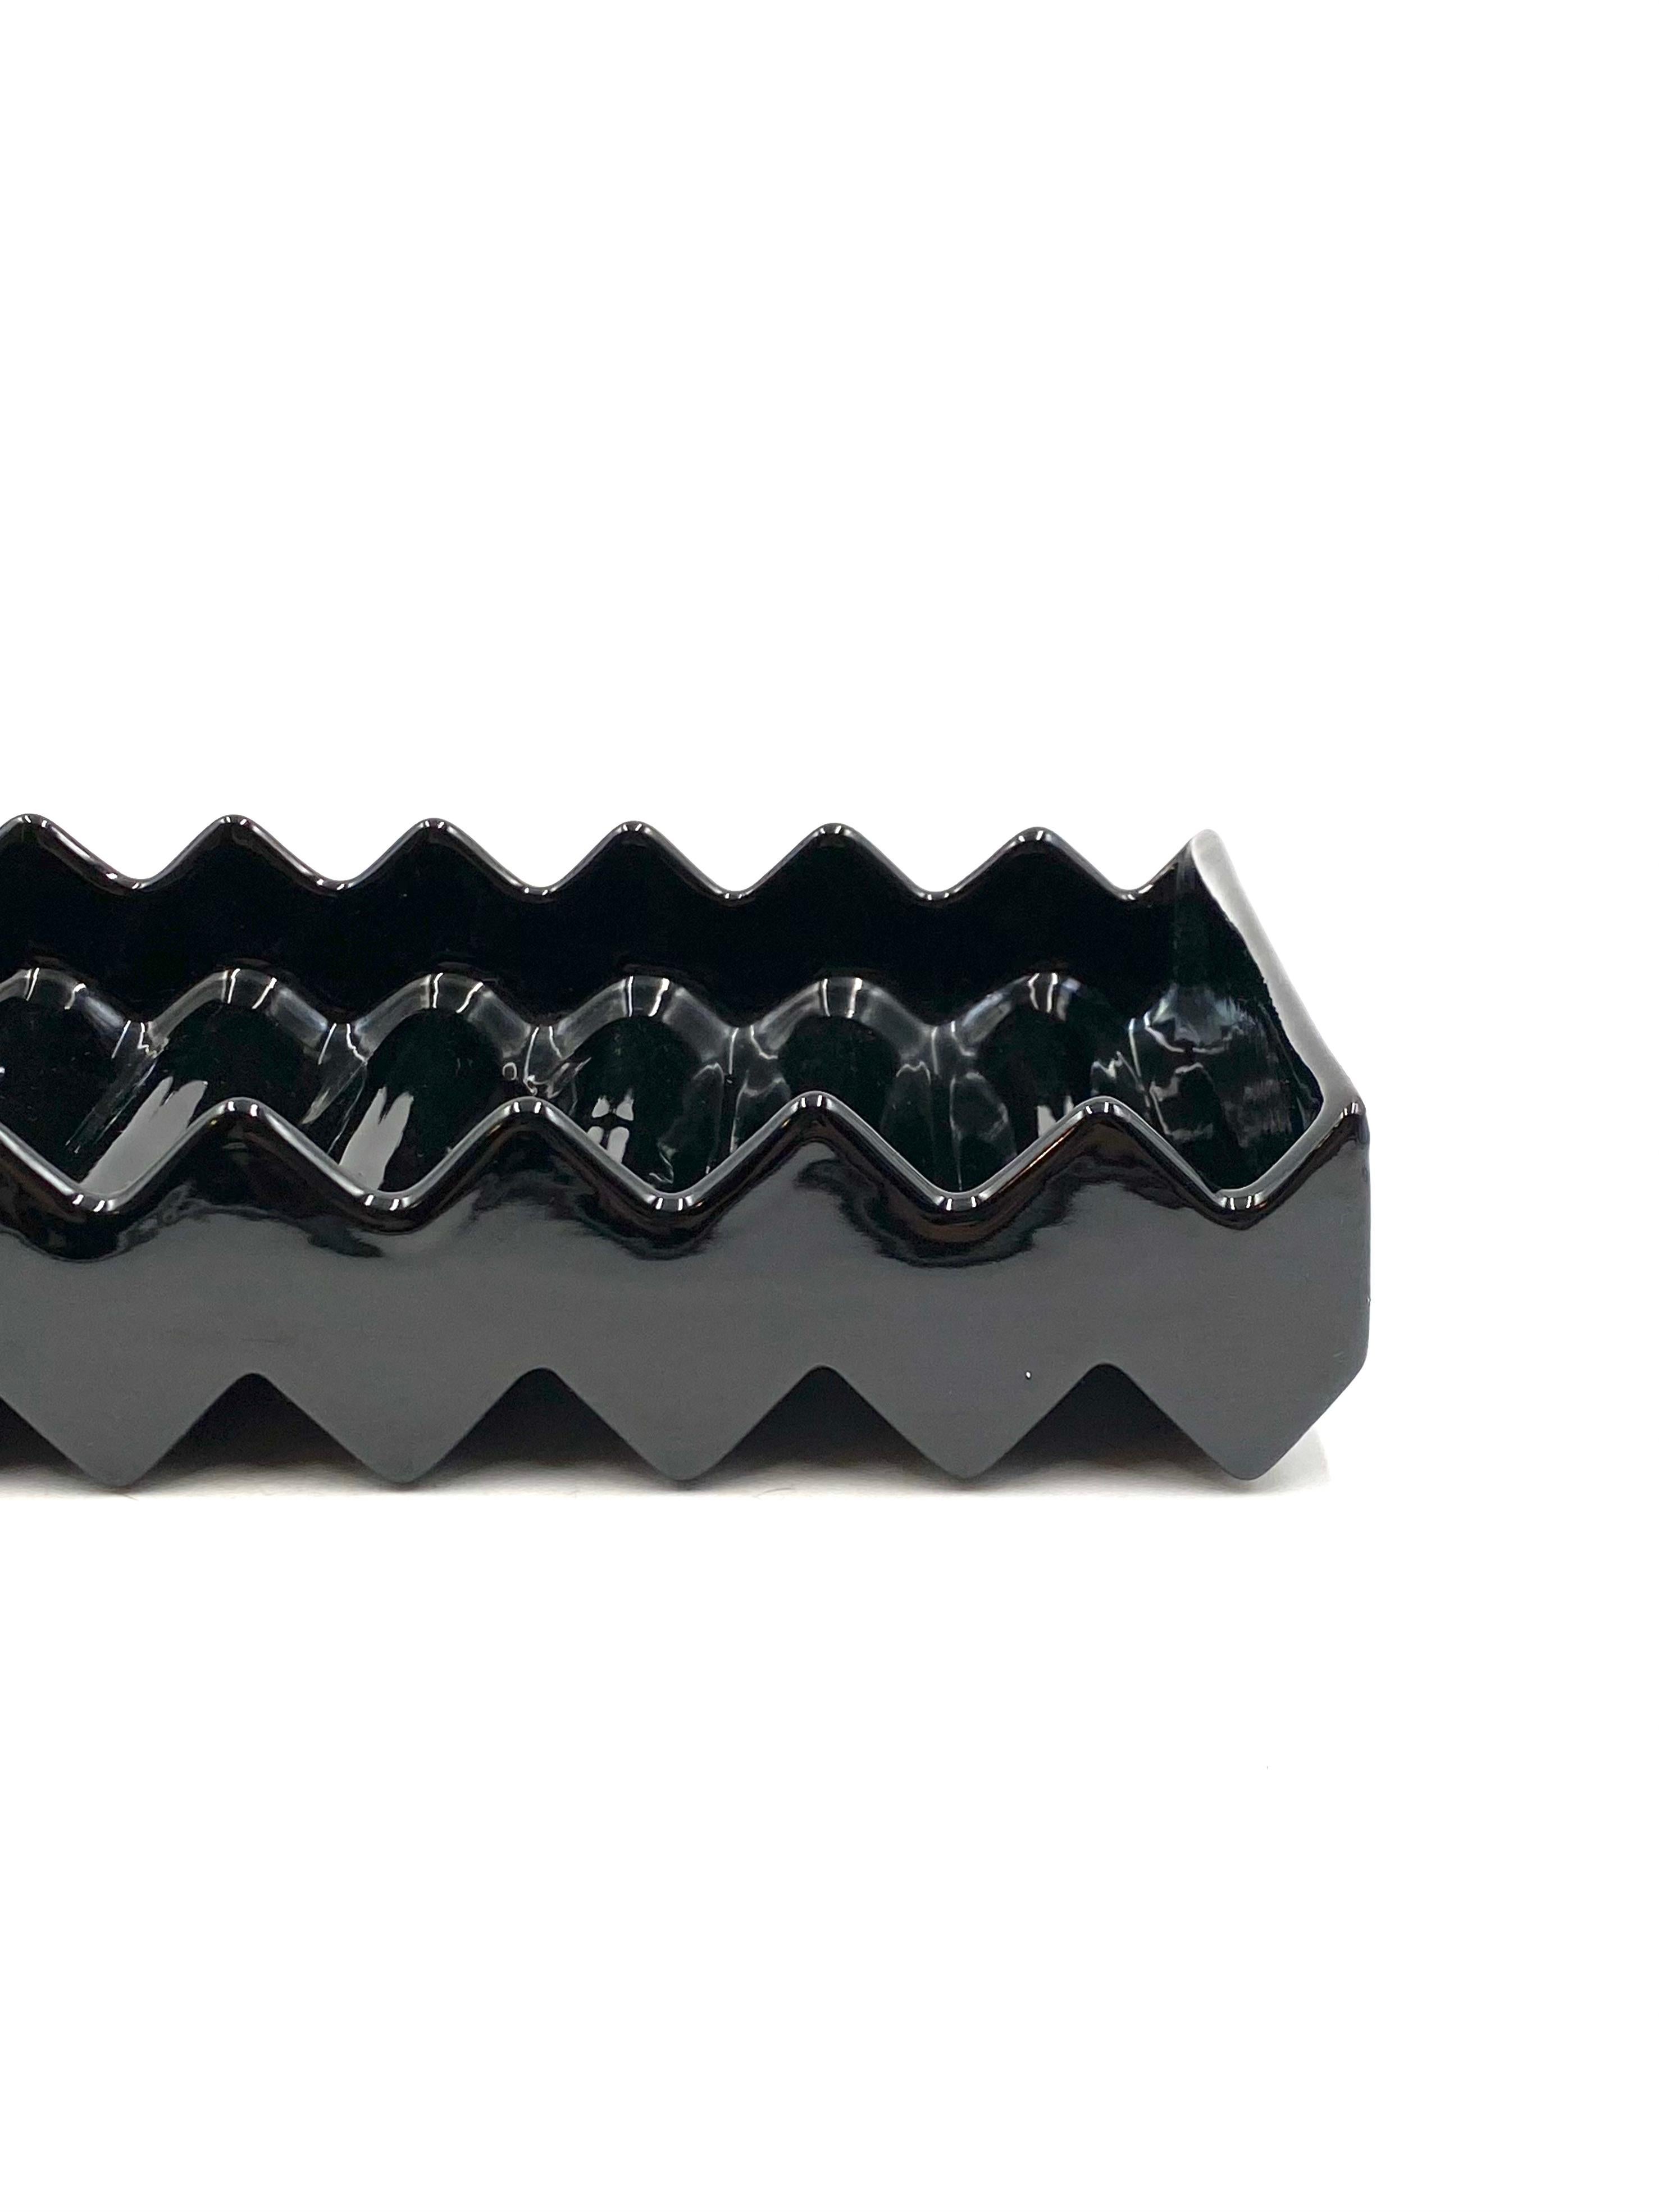 Ettore Sottsass, Vide-Poche / Tray Mod. Y24 from the Yantra Series, Italy, 1969 For Sale 7